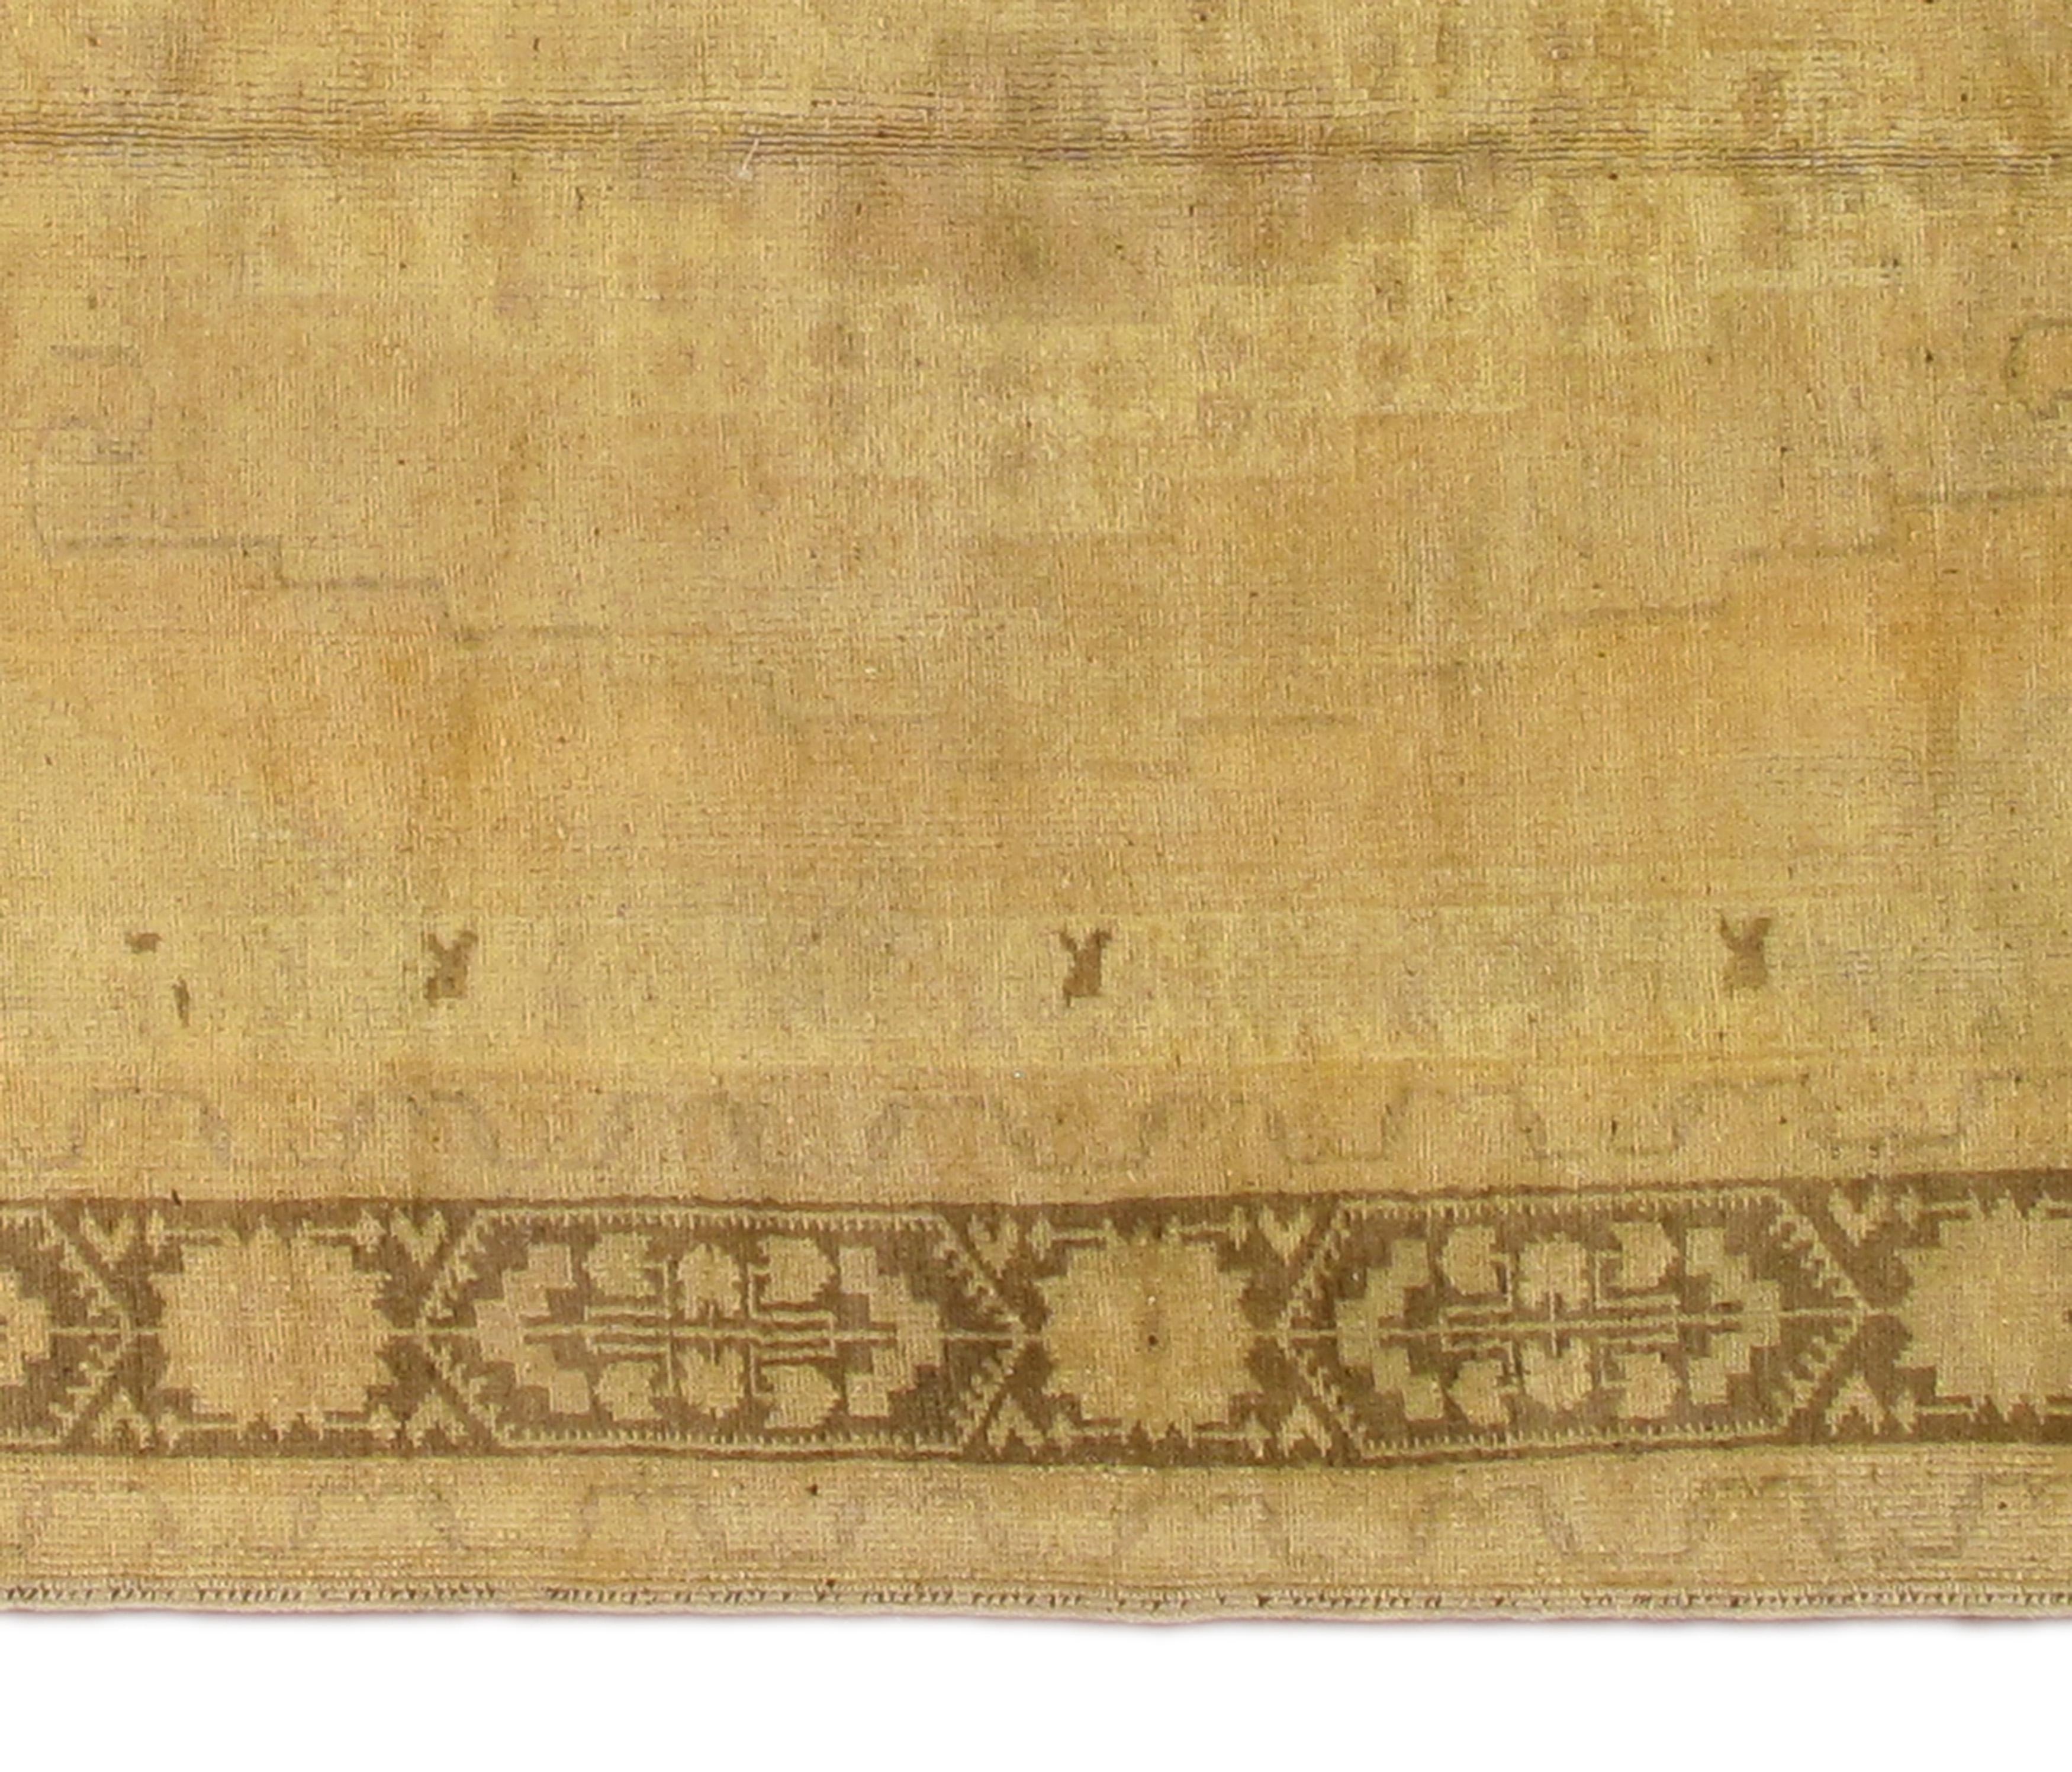 Early 20th Century Beige, Tan Turkish Khotan Carpet In Excellent Condition For Sale In Norwalk, CT